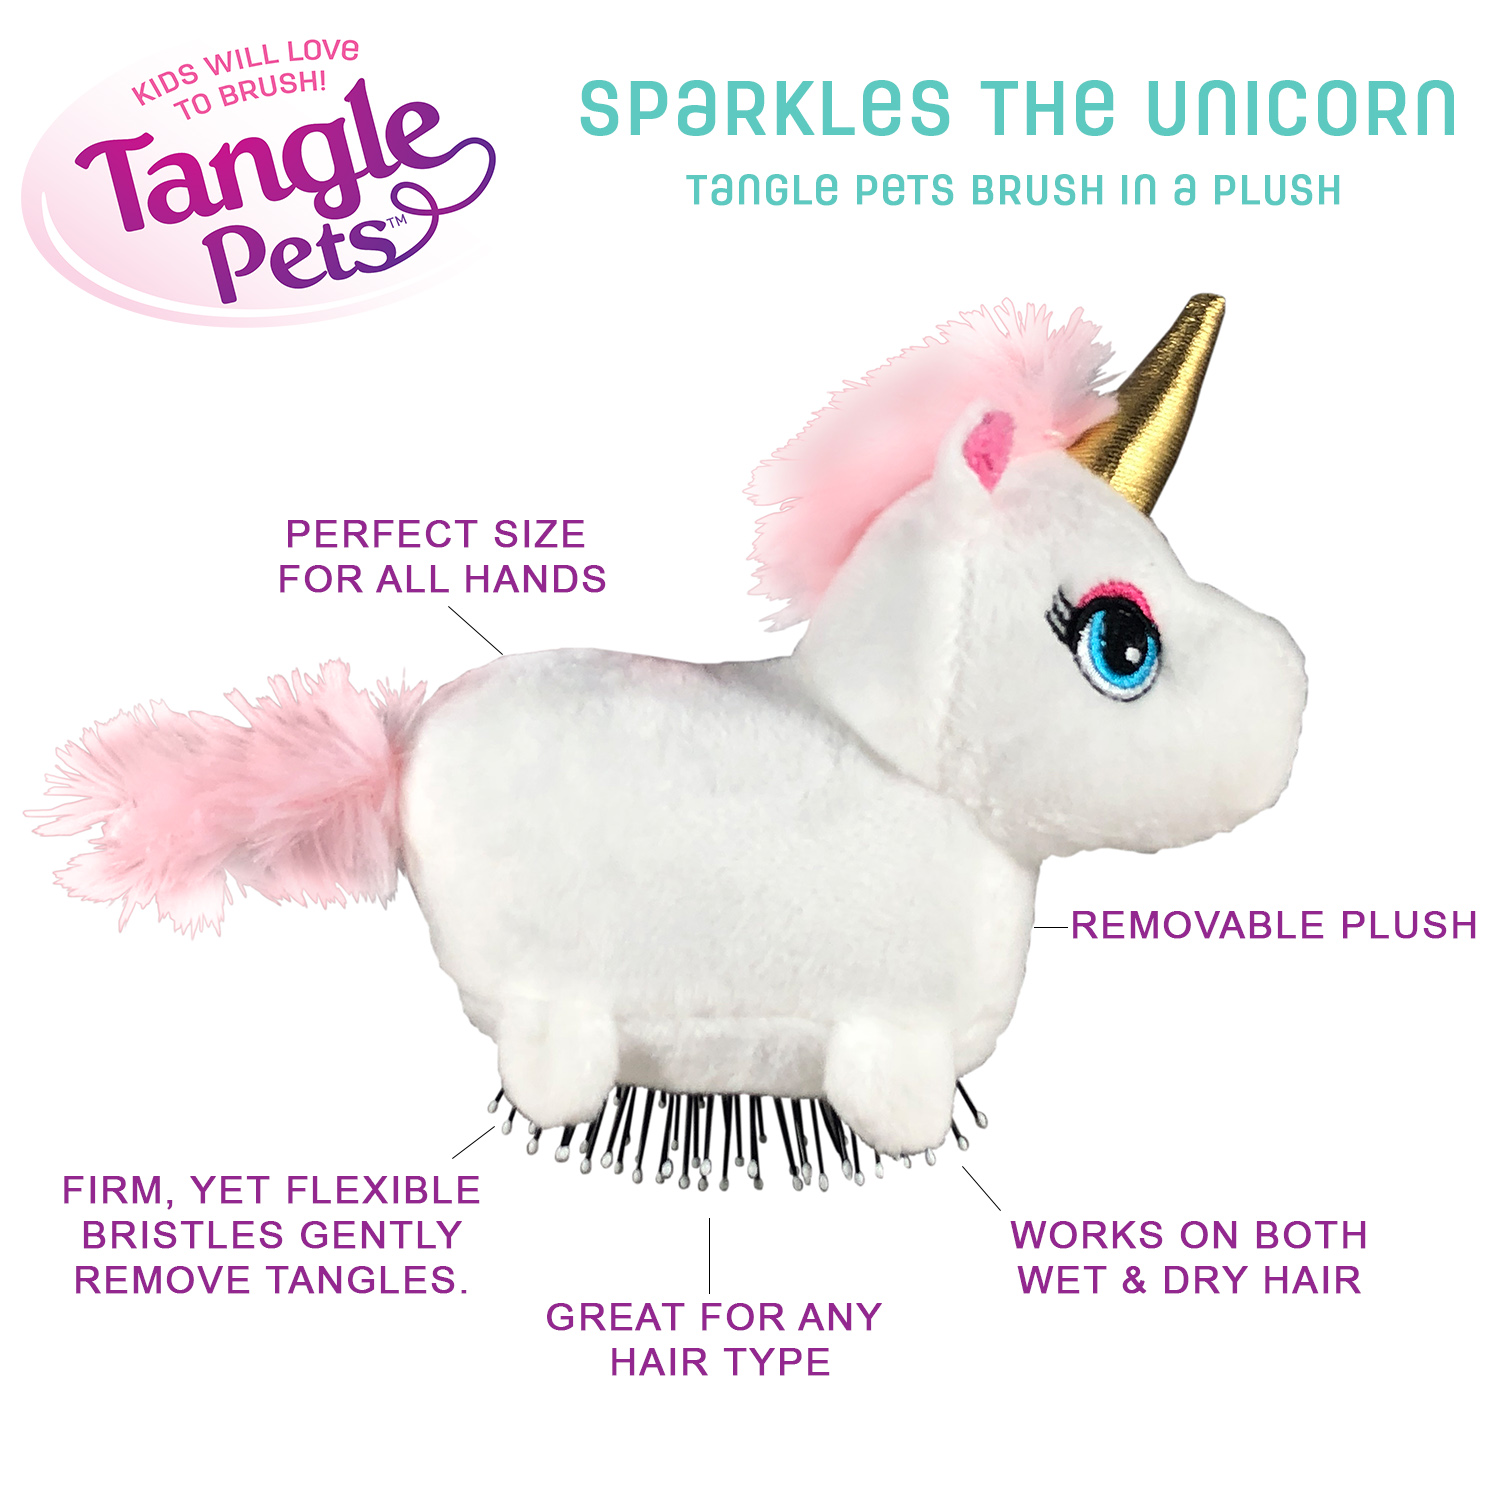 Tangle Pets Brush, Choose Sparkles the Unicorn or Cupcake the Cat - image 3 of 8